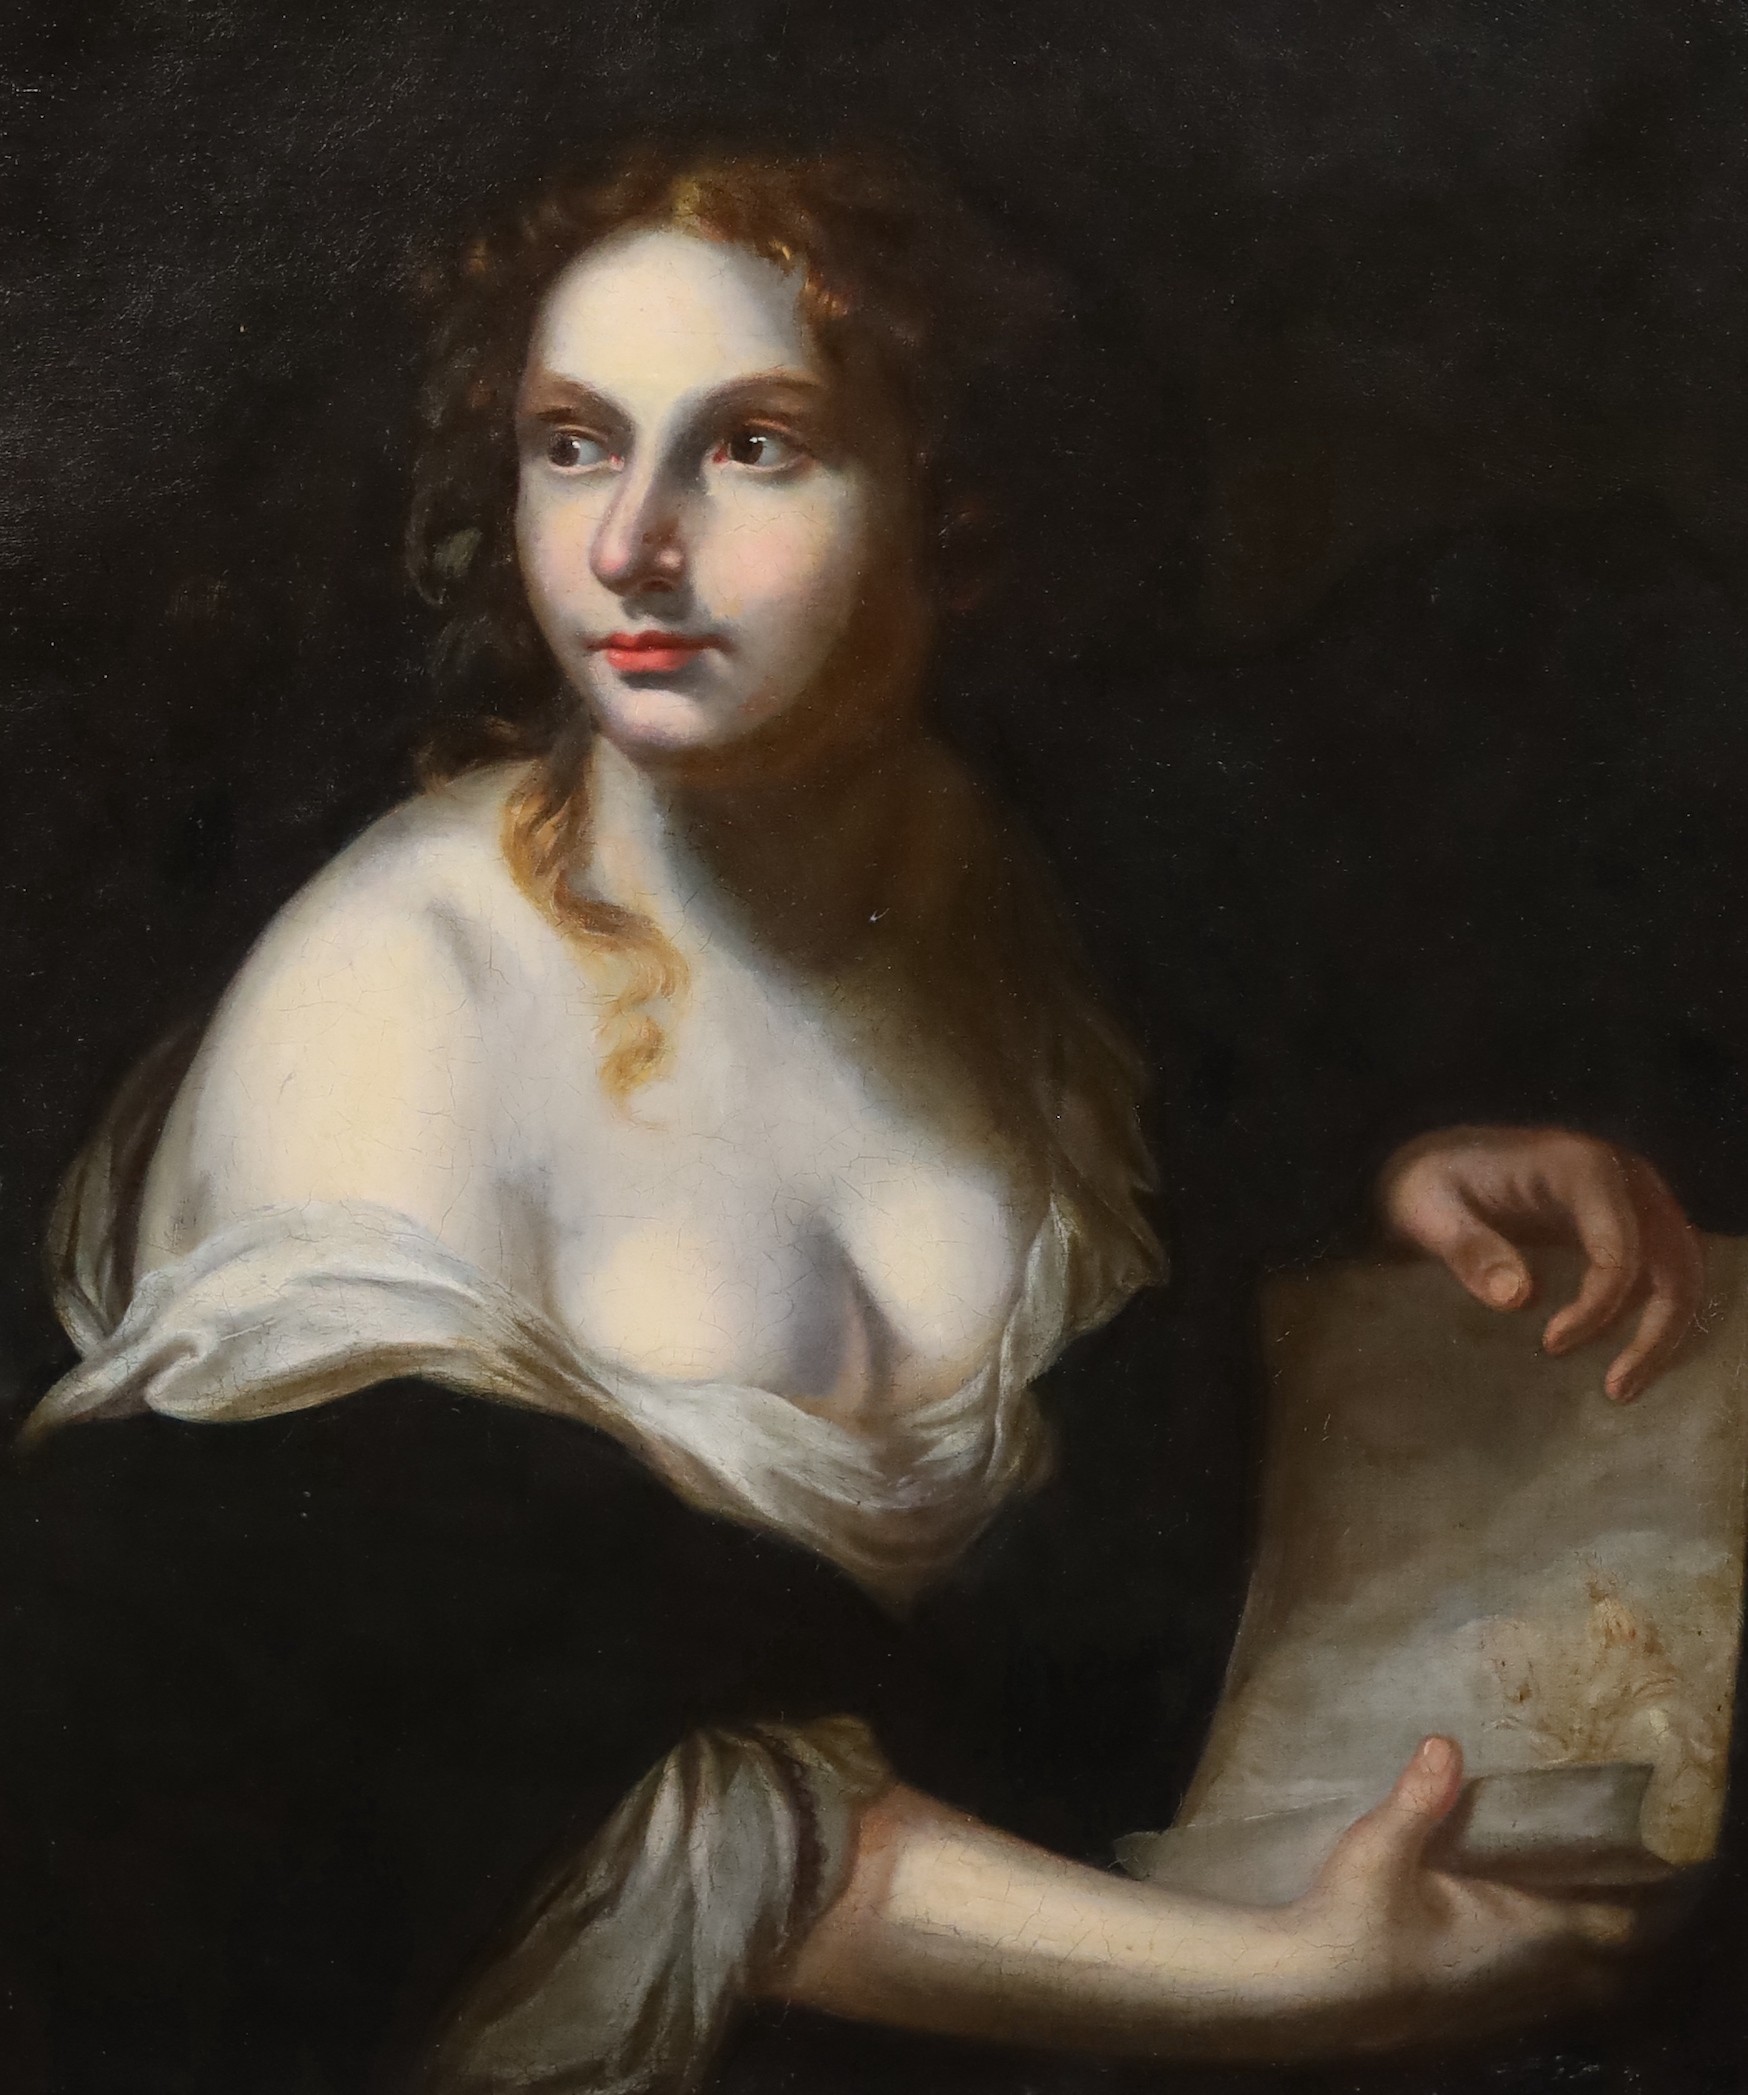 18th century English School , Portrait of a woman holding an Old Master drawing, oil on canvas, 74 x 61cm